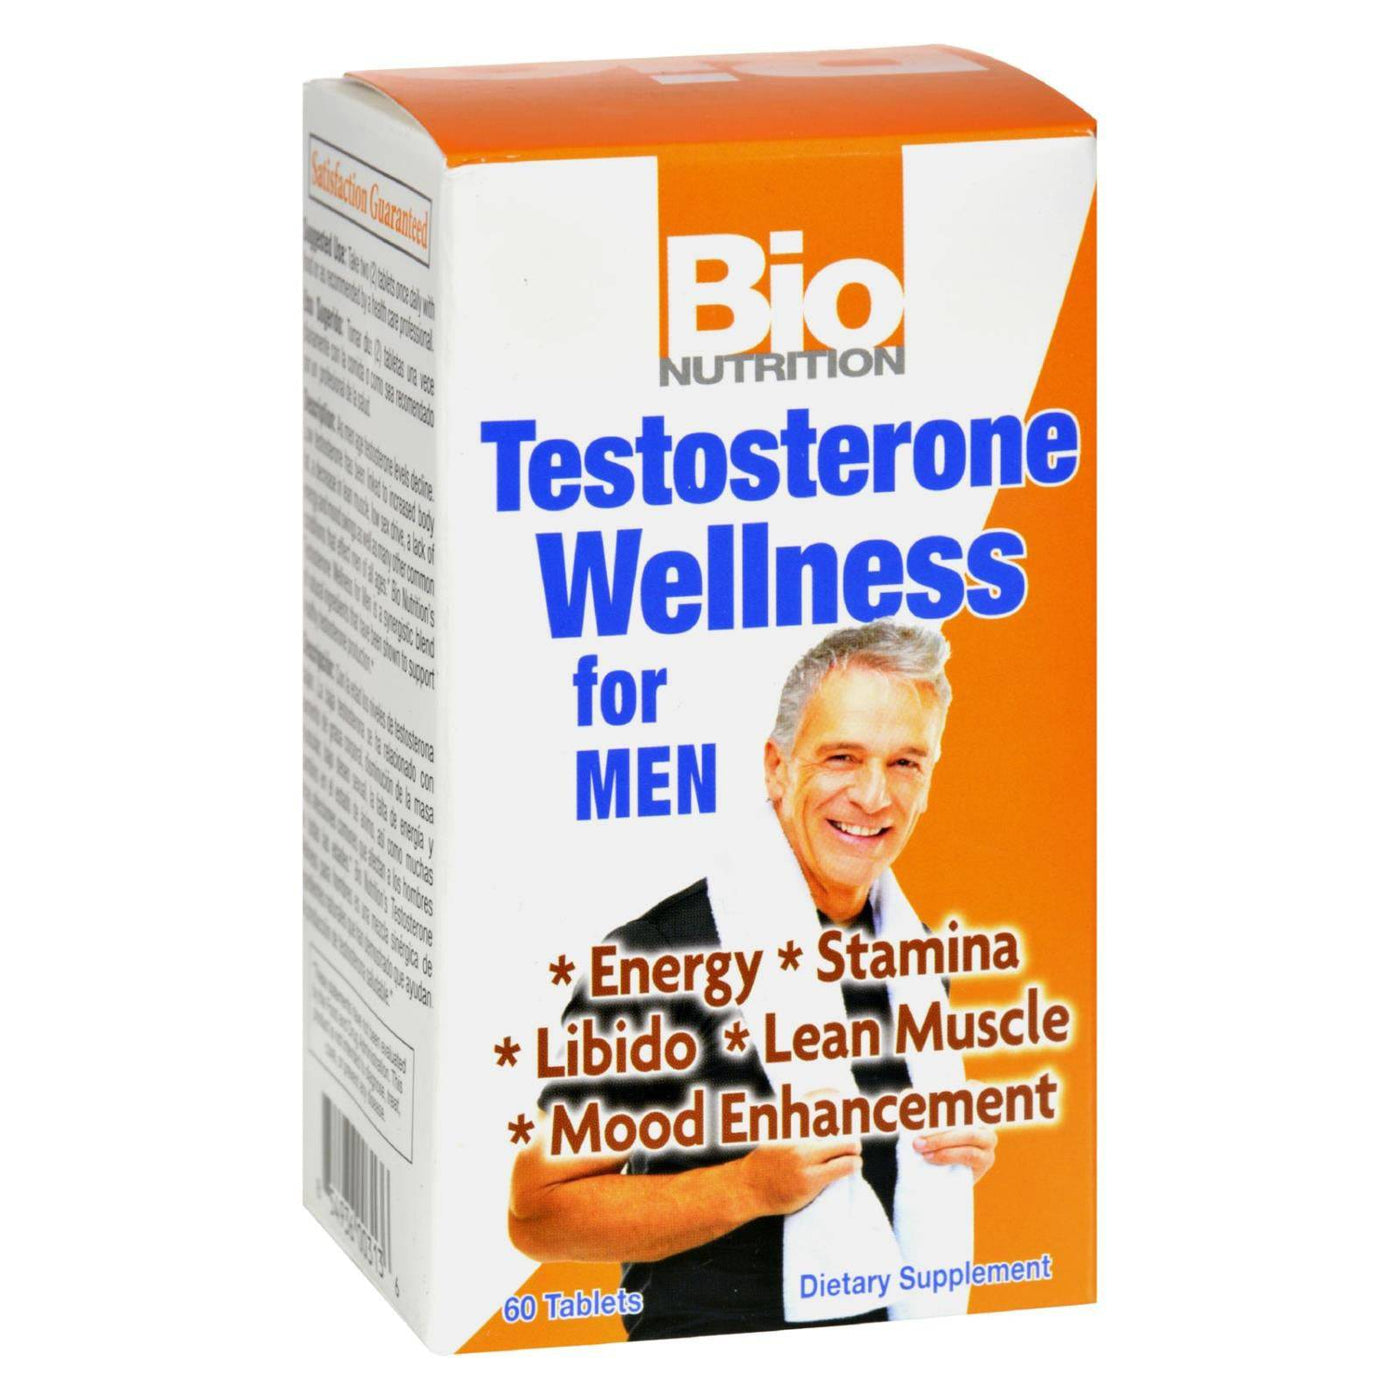 Buy Bio Nutrition - Testosterone Wellness For Men - 60 Tablets  at OnlyNaturals.us